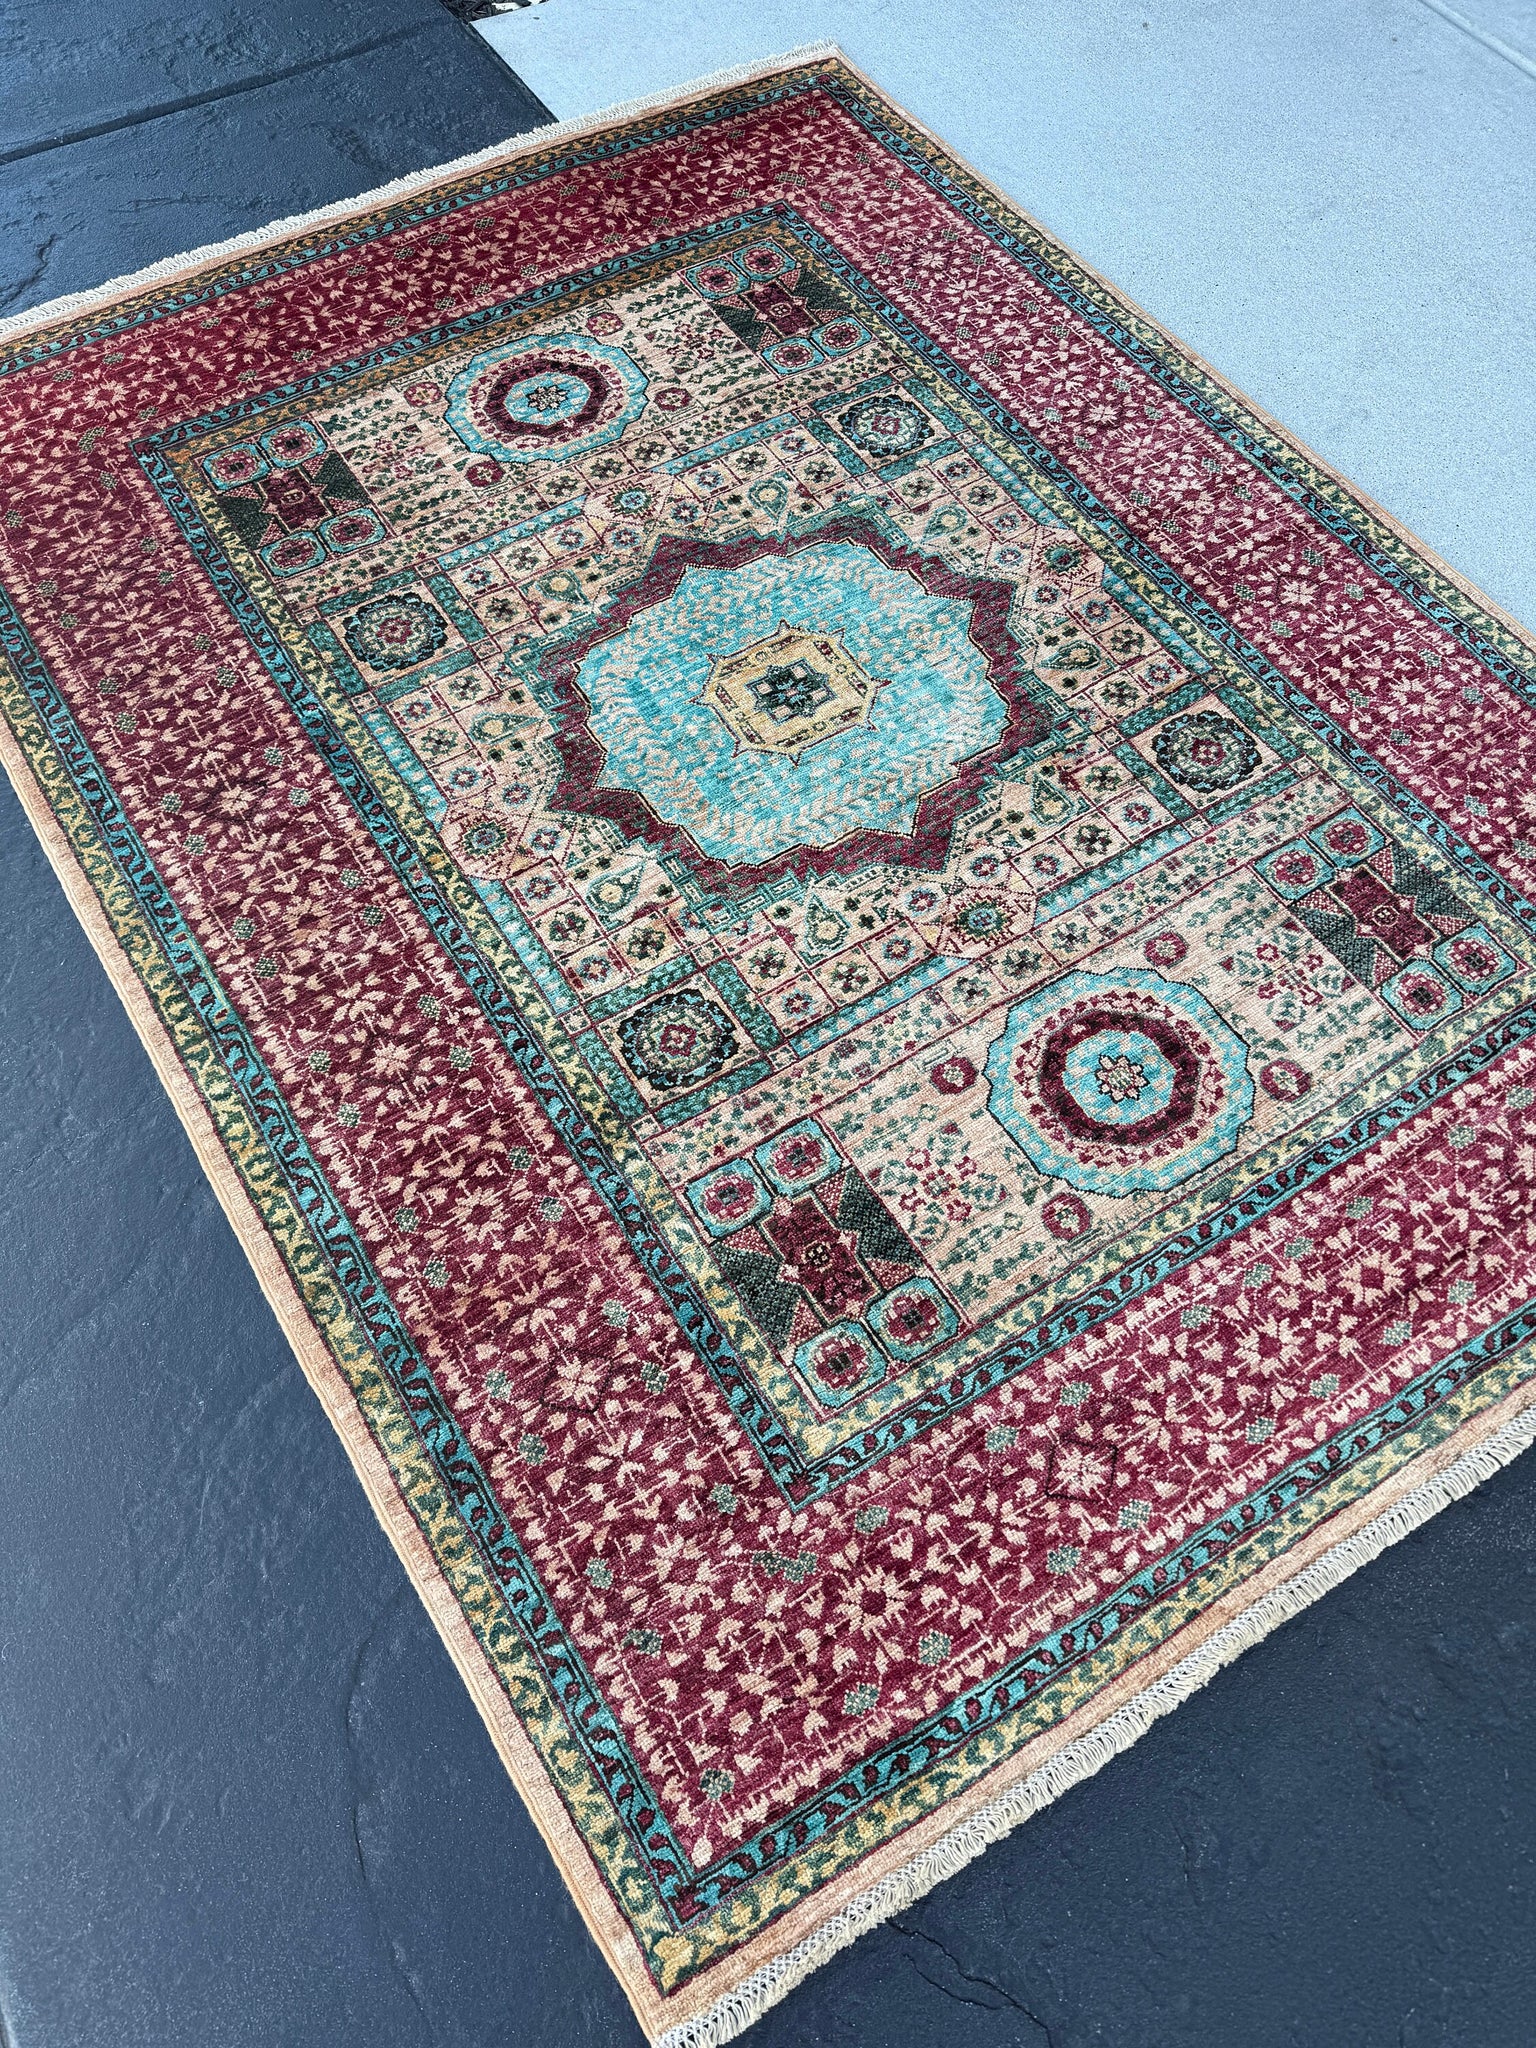 4x6 (120x180) Handmade Afghan Rug | Watermelon Red Cream Coral Emerald Pistachio Sea-grass Cream | Wool Persian Knotted Mamluk Traditional